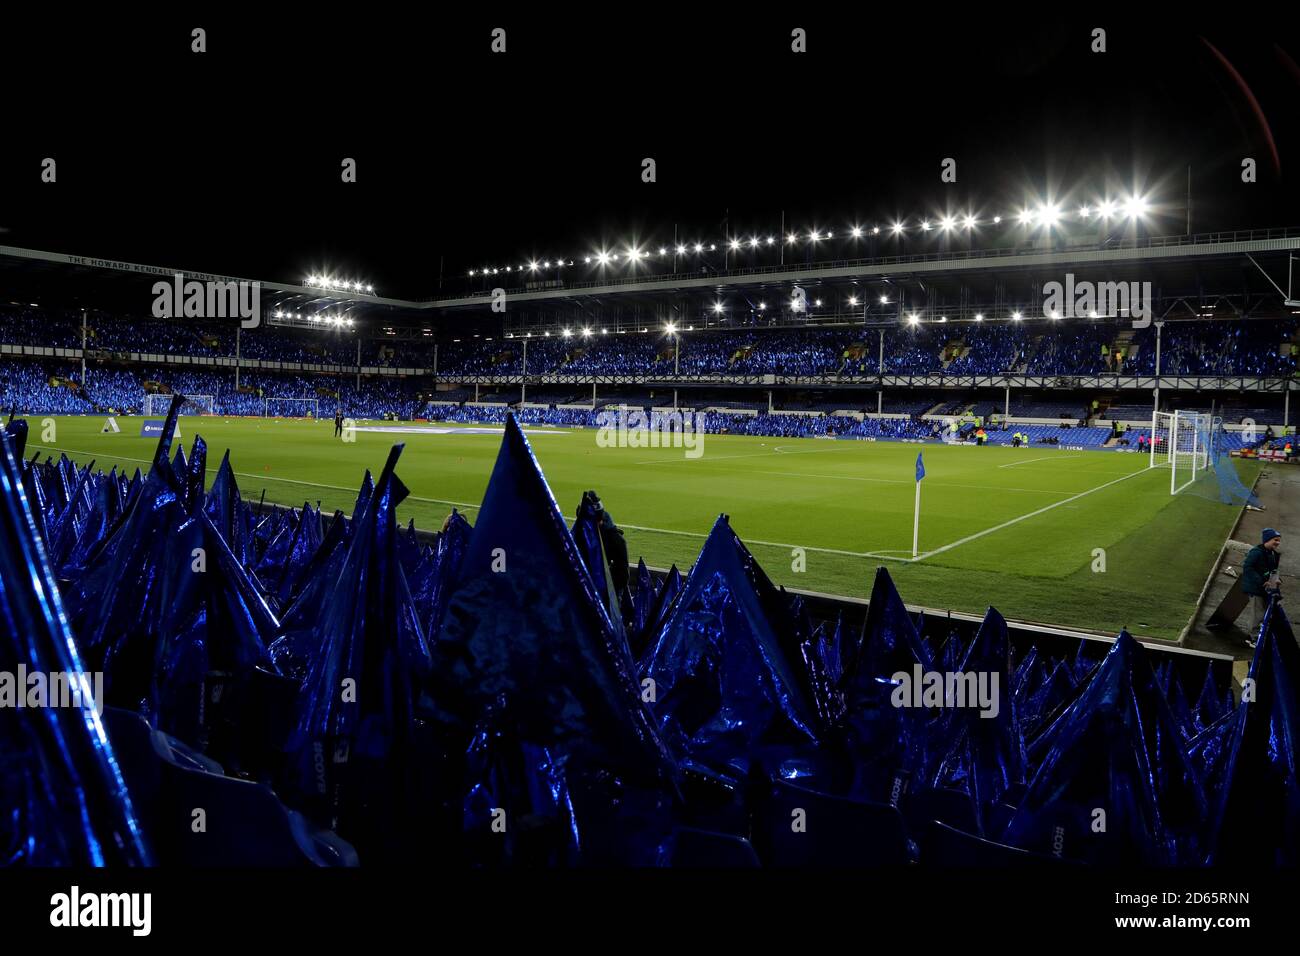 Flags in seats at Goodison Park before kick off Stock Photo